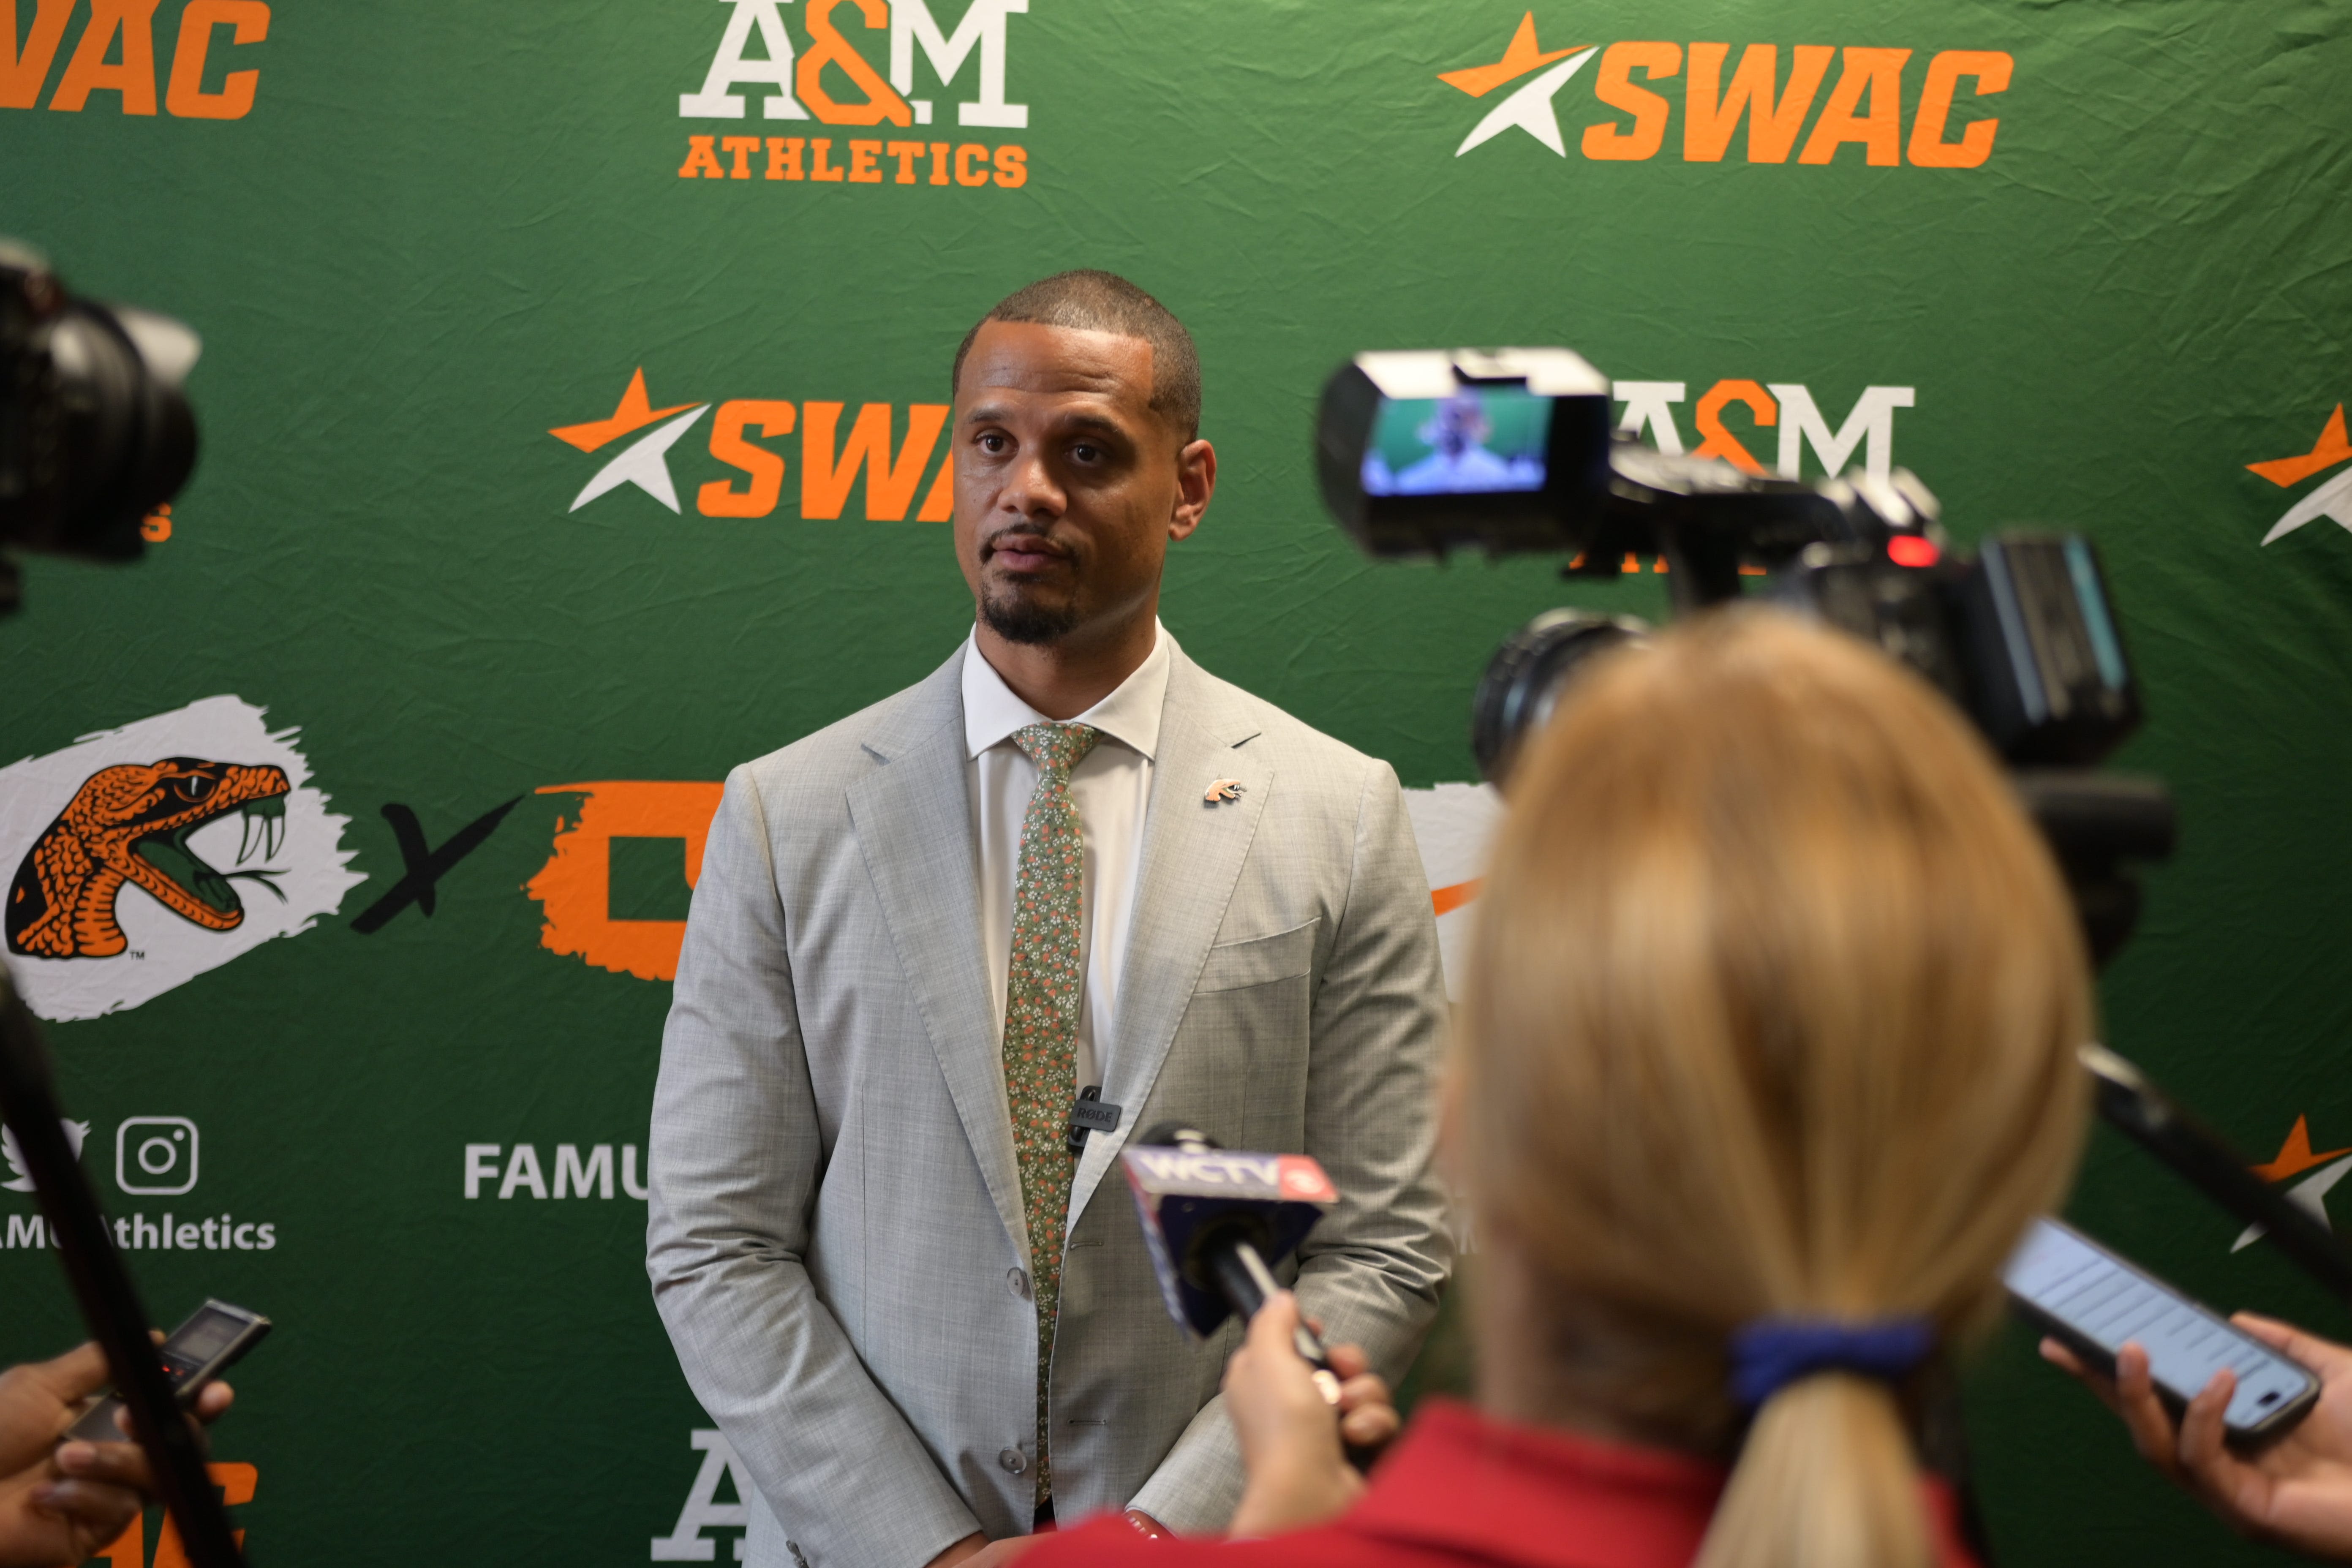 'I'm here to win': Patrick Crarey II has clear vision for FAMU's men's basketball program